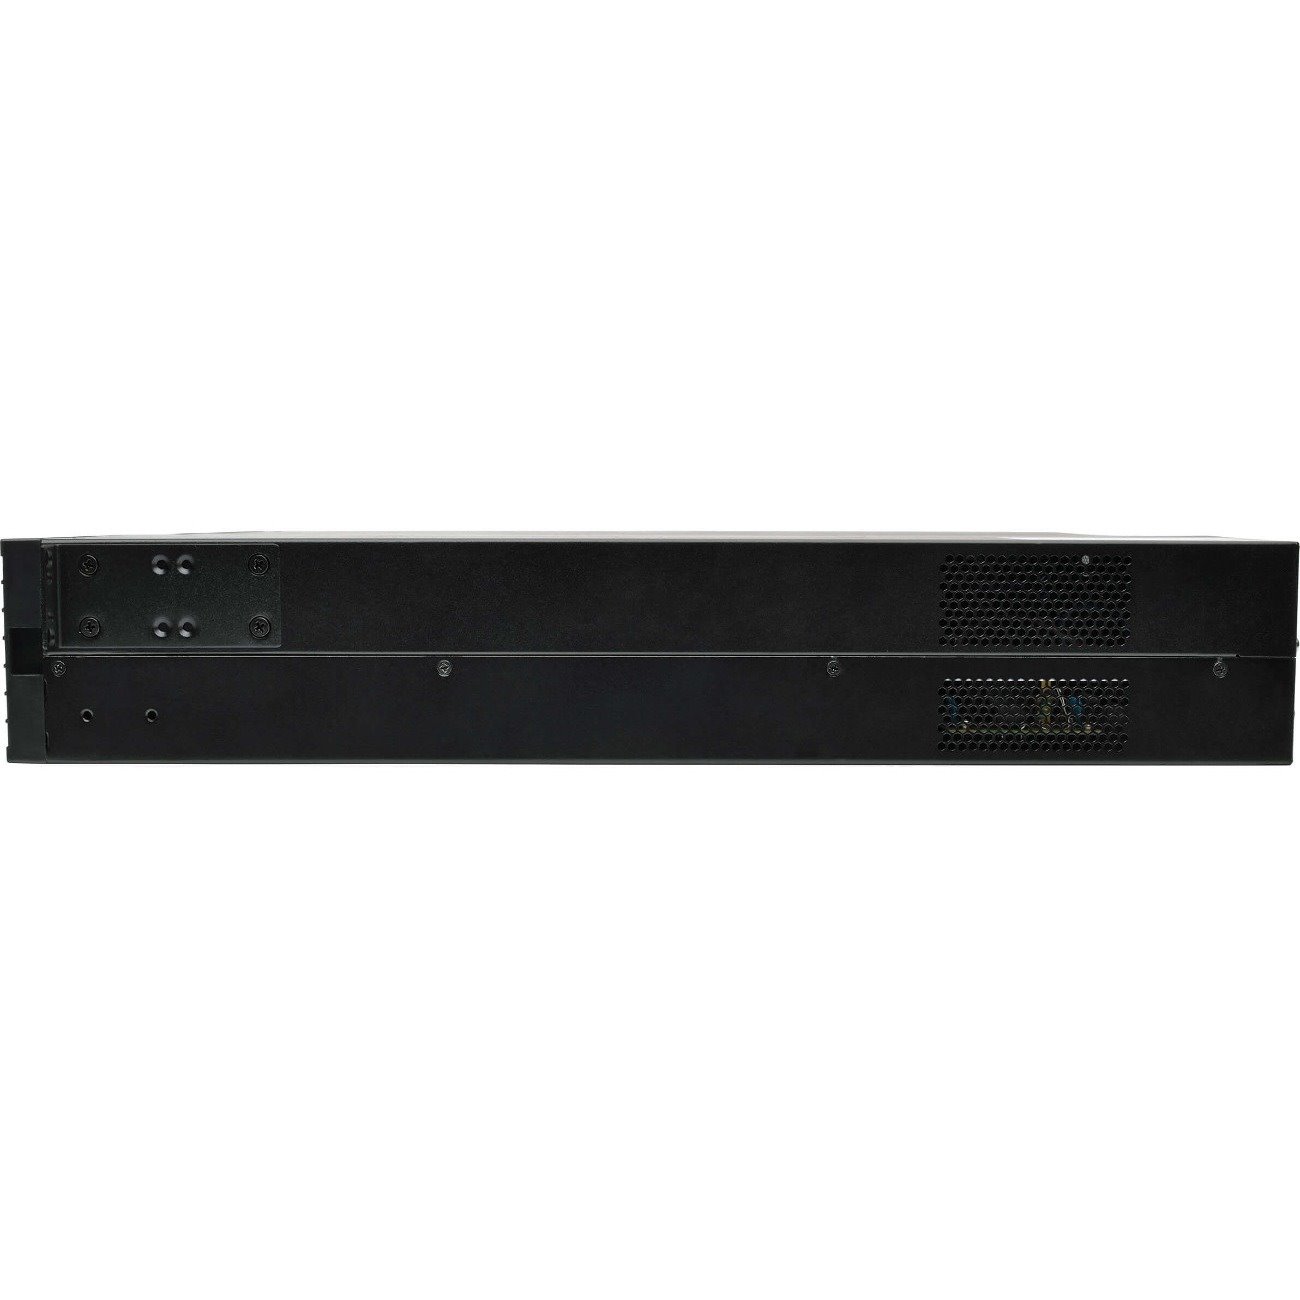 Tripp Lite by Eaton UPS 208/230V 3000VA 2700W Double-Conversion UPS - 10 Outlets Extended Run WEBCARDLX LCD USB DB9 2U